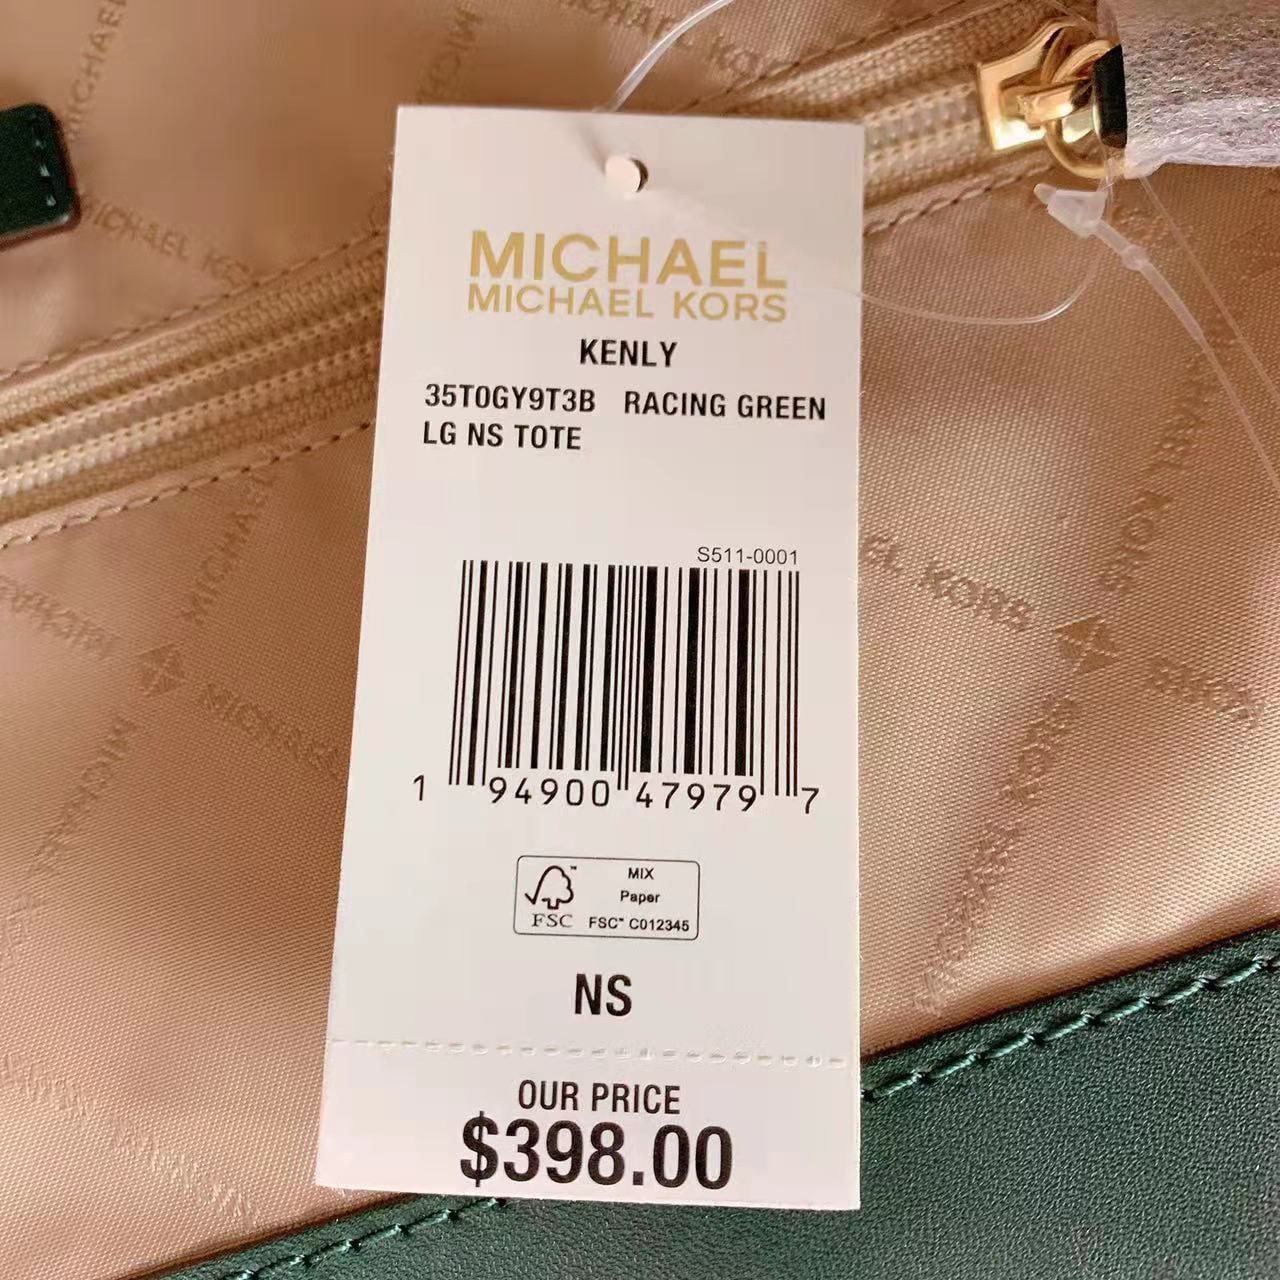 Michael Kors 35T0Gy9T3B Kenly Large Logo Tote Bag In Racing Green